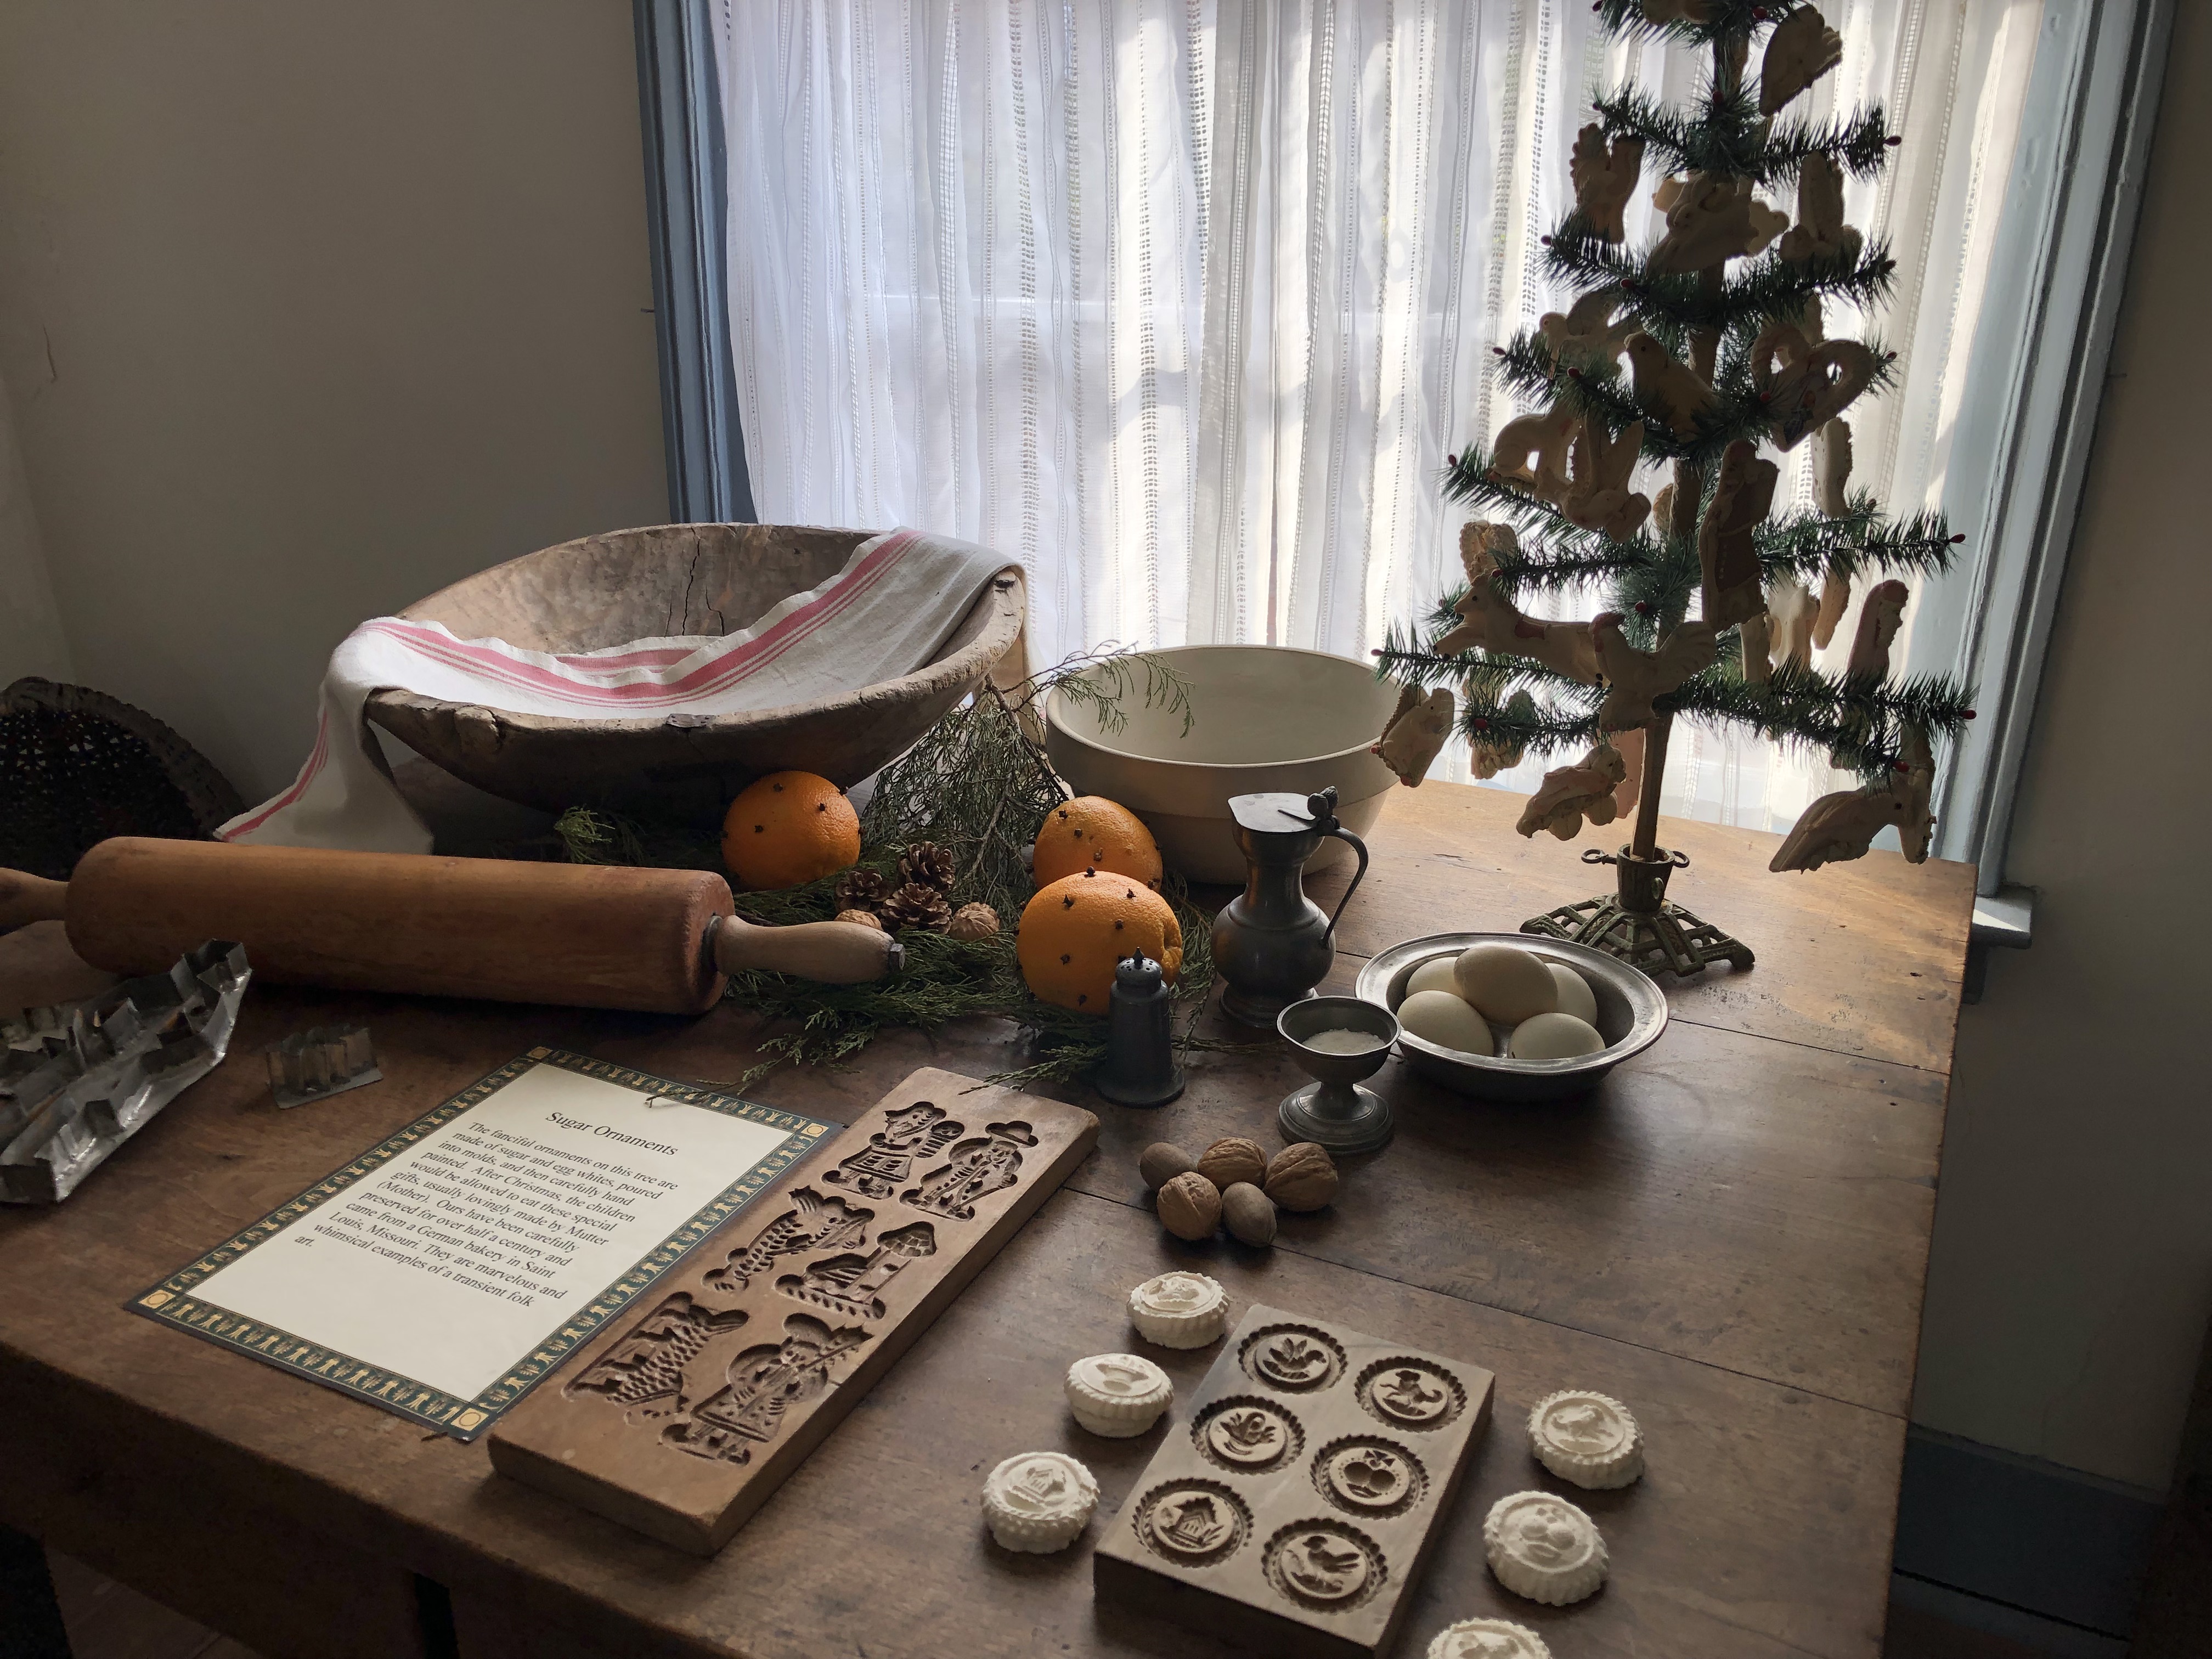 Cookie cutters, springerle mold, rolling pin, bowls, oranges, nuts and small Christmas tree on table